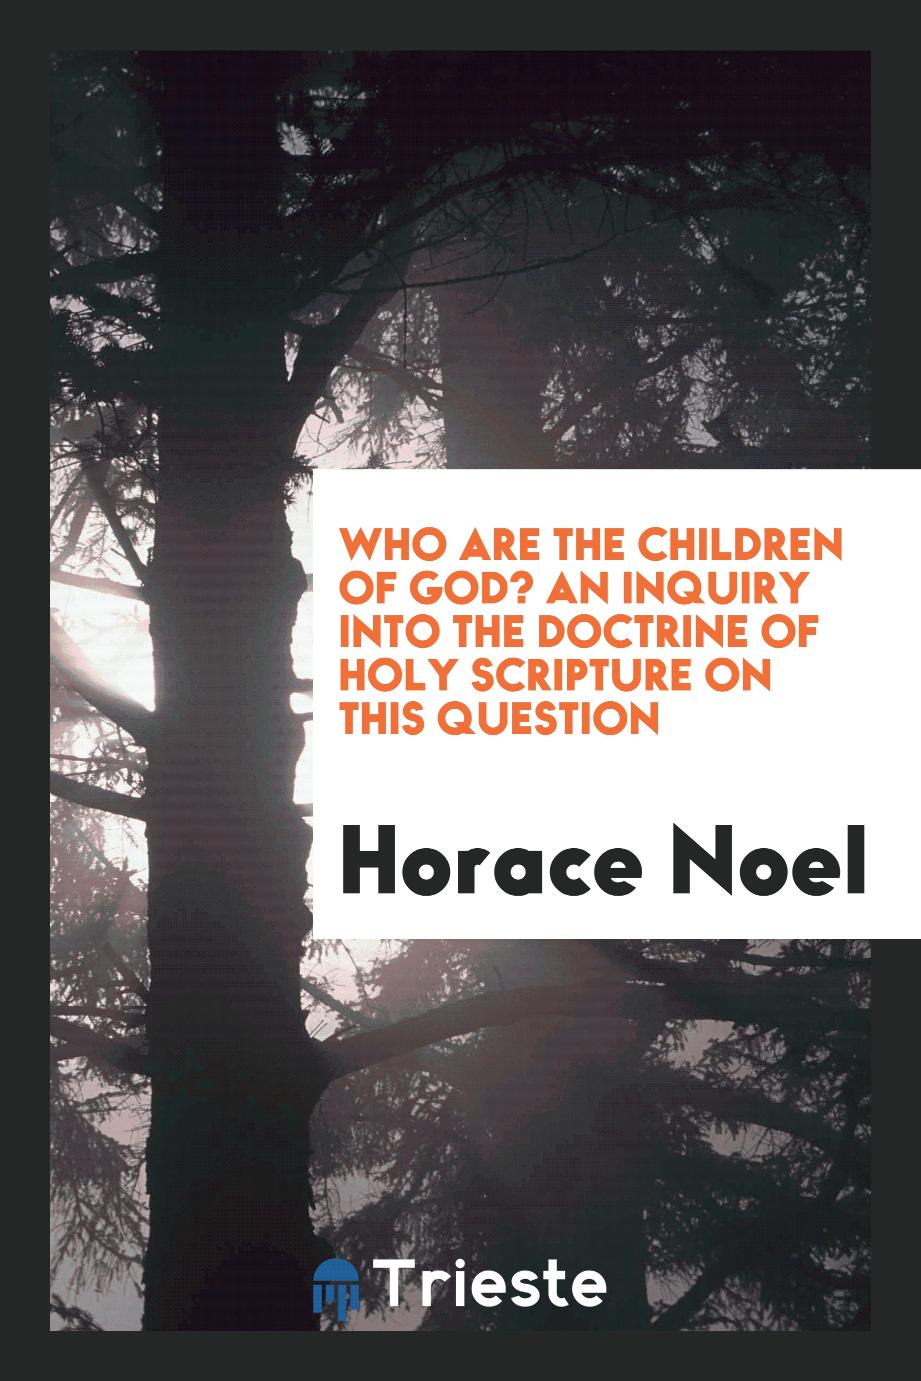 Who are the children of God? An inquiry into the doctrine of holy Scripture on this question